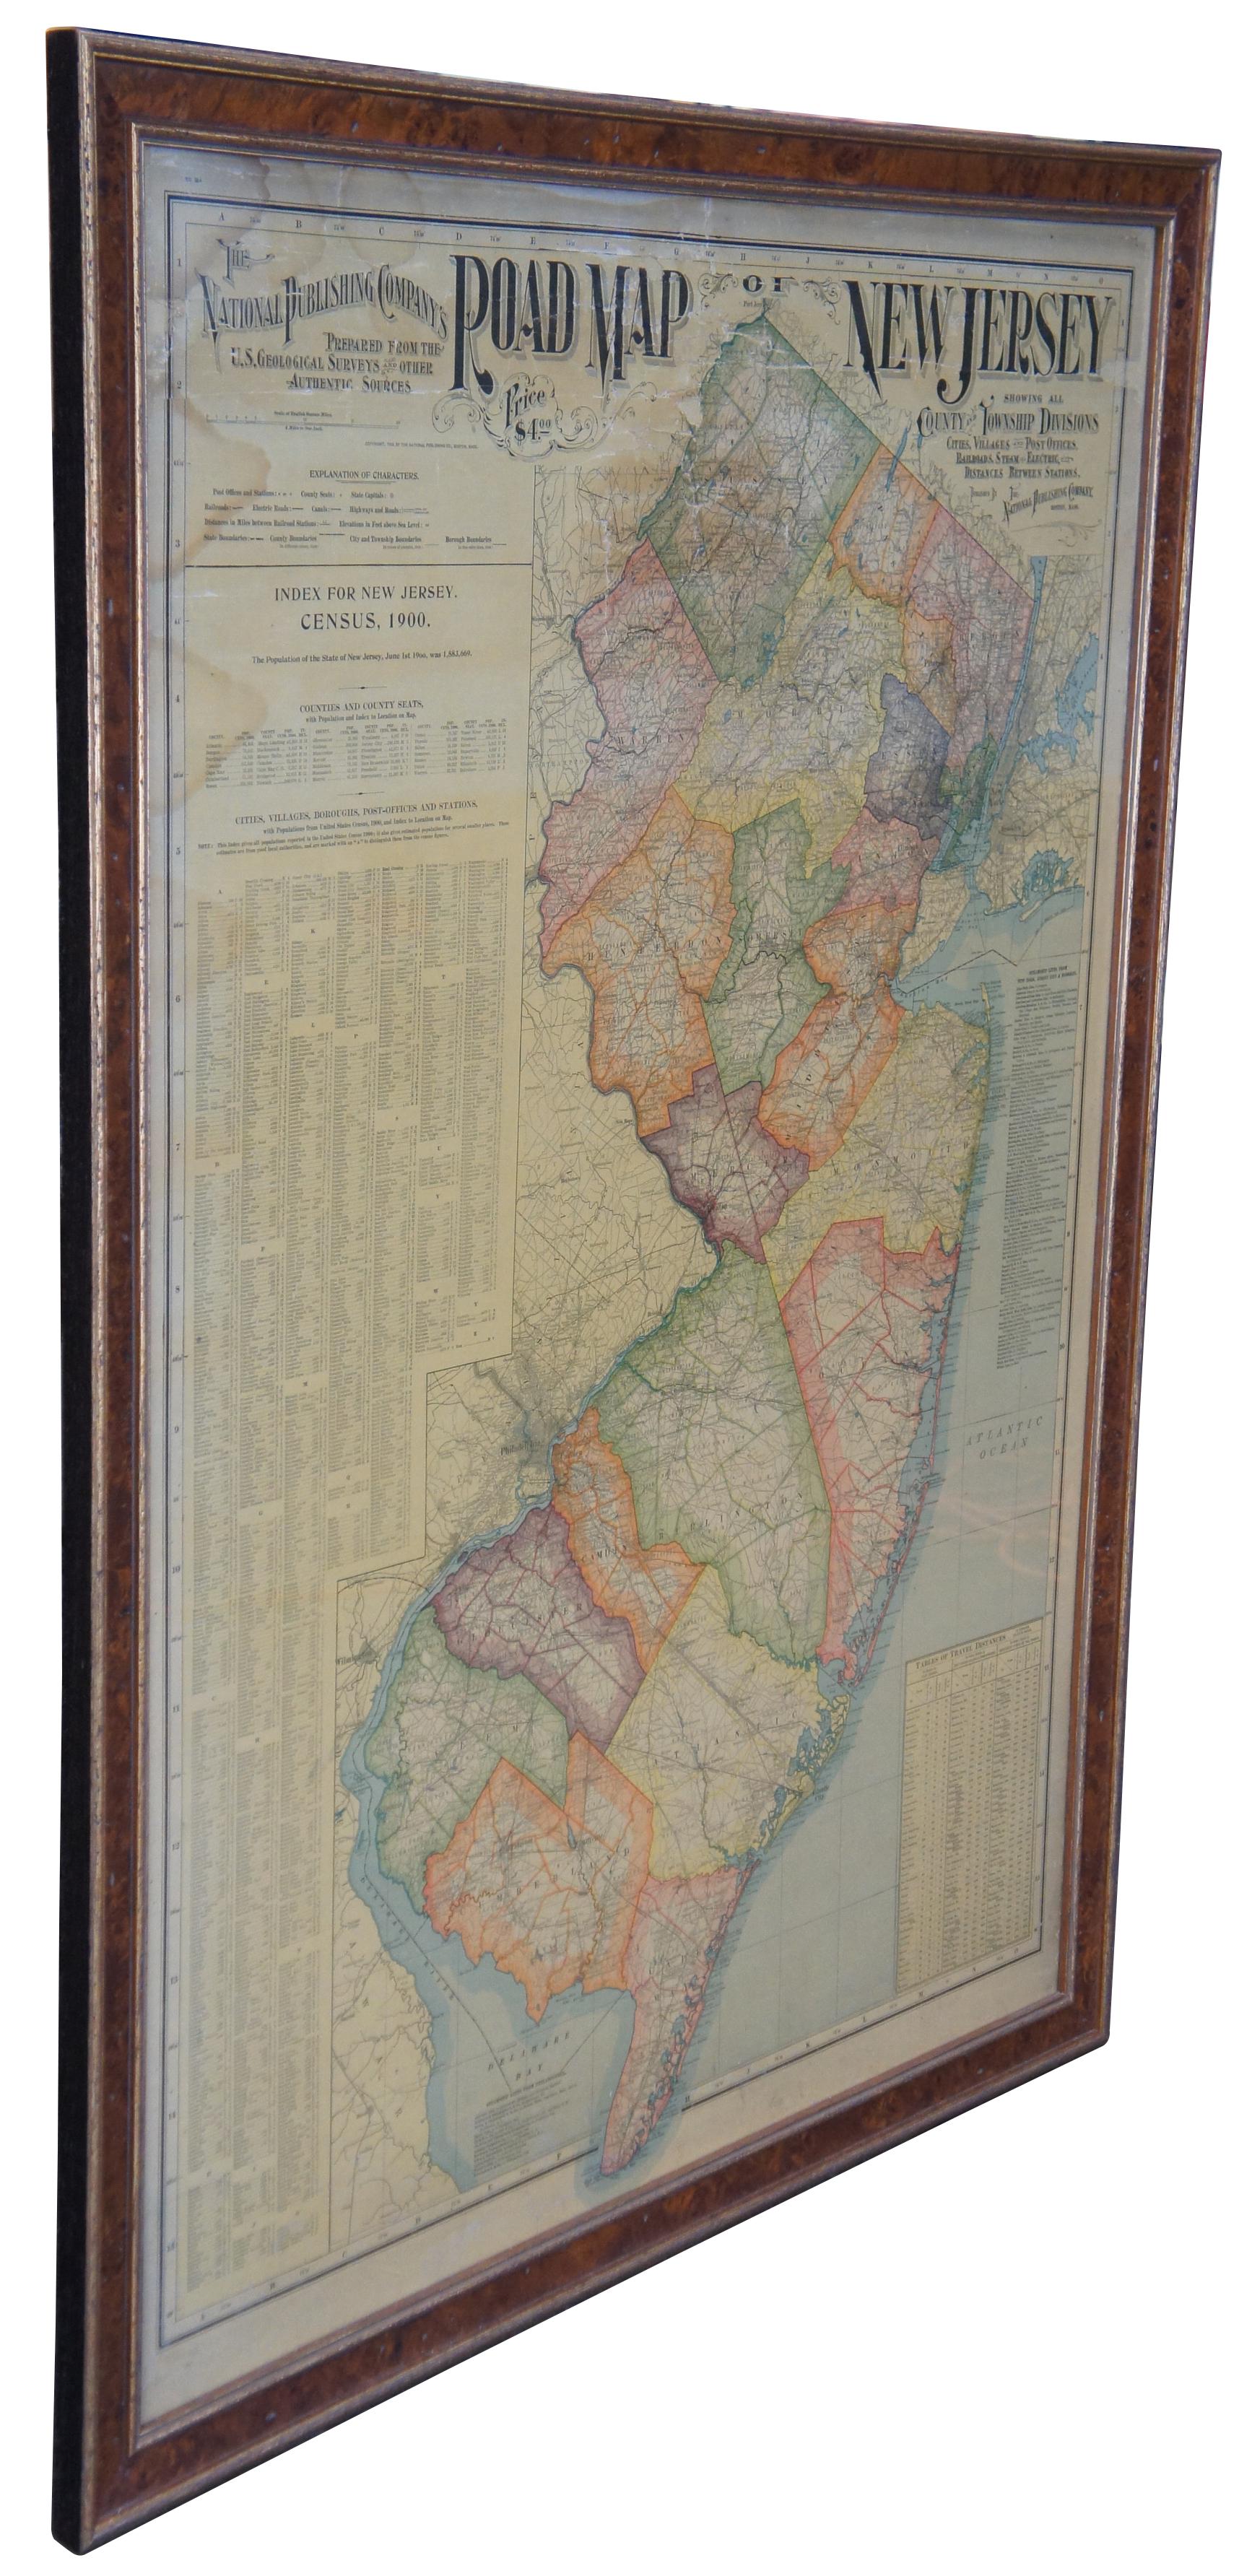 1903 antique New Jersey road map by The National Publishing Company of Boston Massachusettes, No 384. Index for New Jersey Census 1900, Population 1,883,669. Framed in burl wood with gold accent. 

Measures: map 44.5